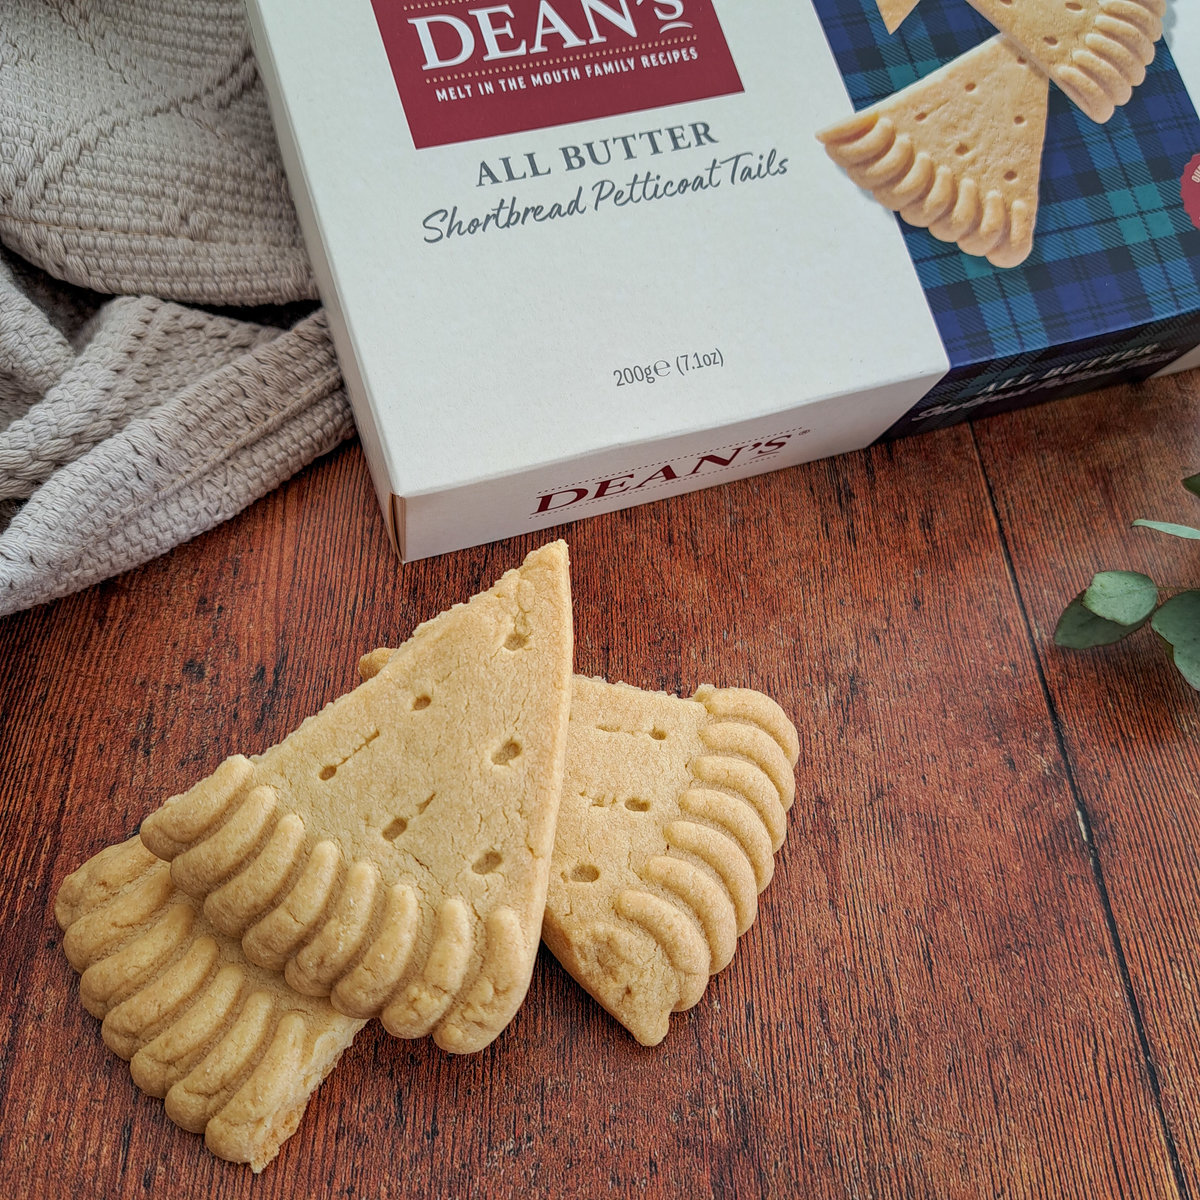 Buy the All Butter Shortbread Petticoat Tails 200g online at Dean's of Huntly Ltd